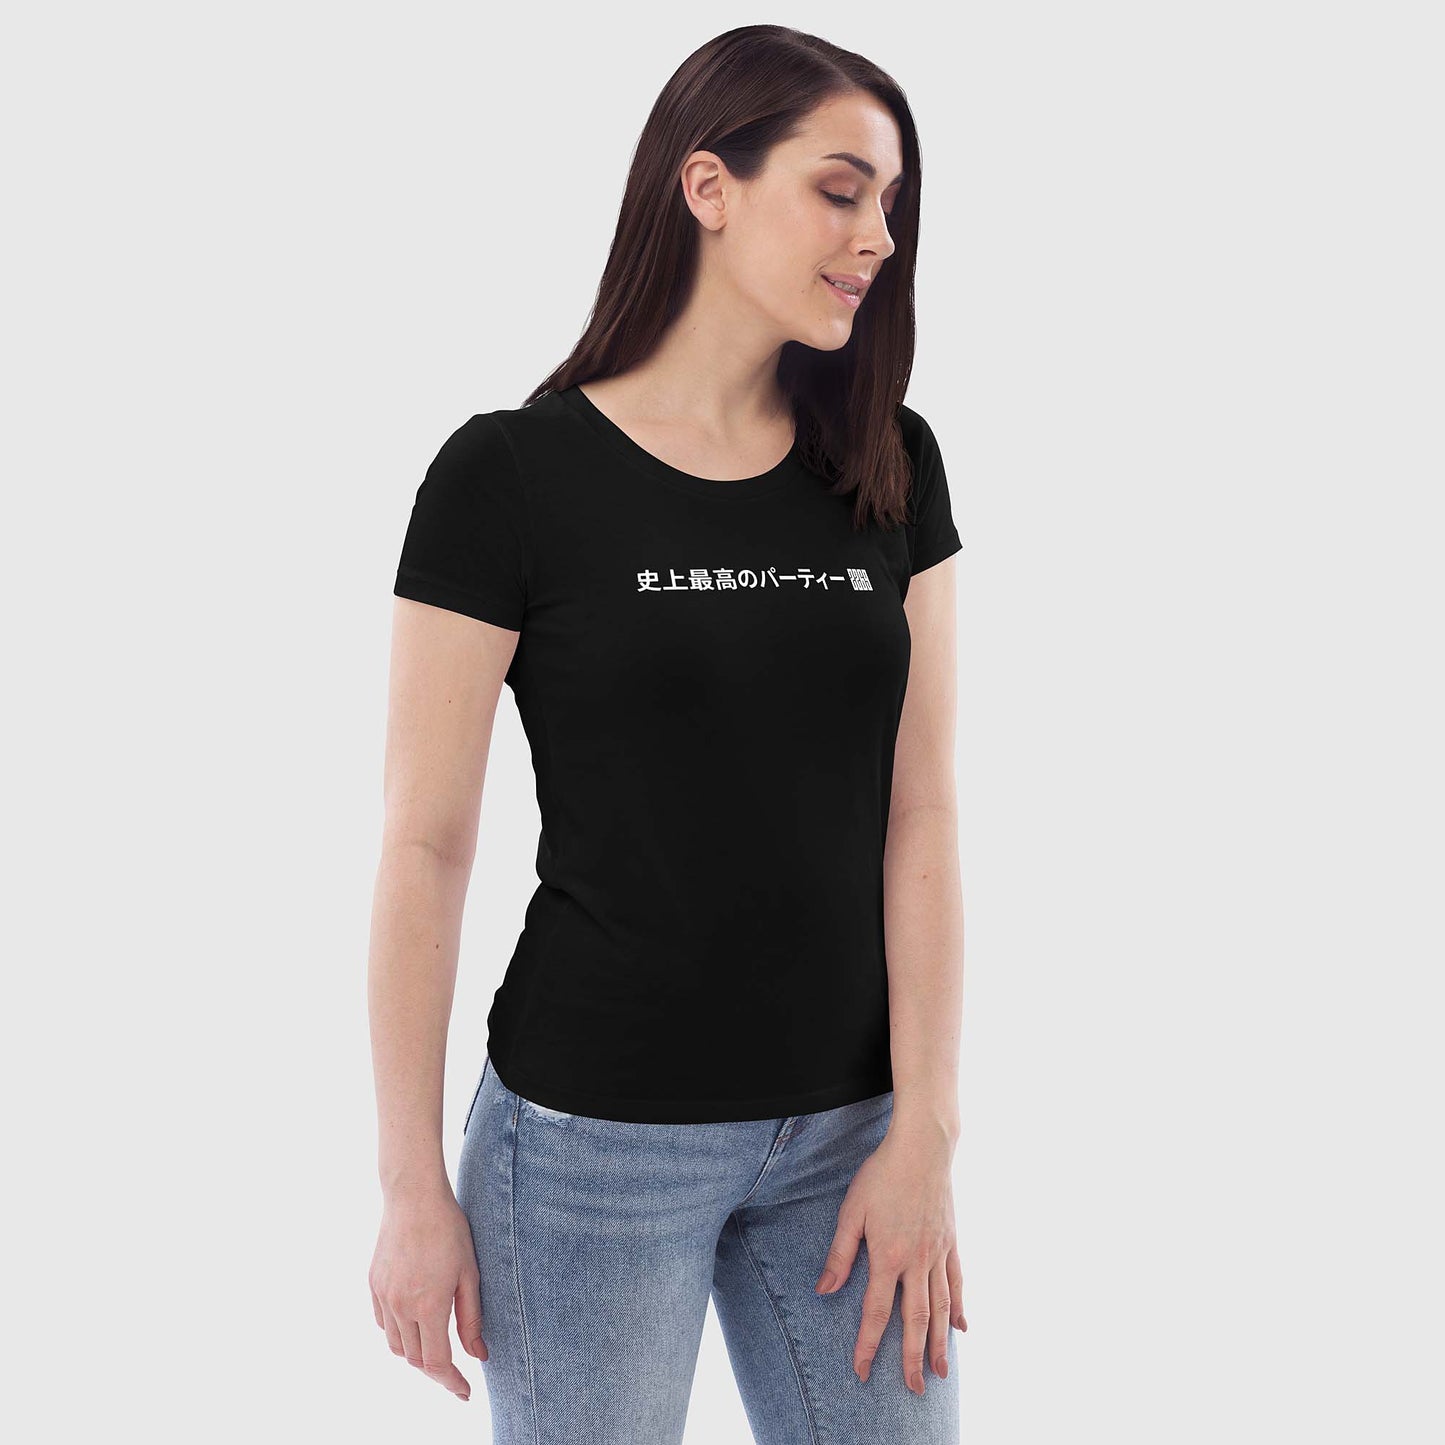 Women's black fitted organic cotton t-shirt with Japanese 2269 party message